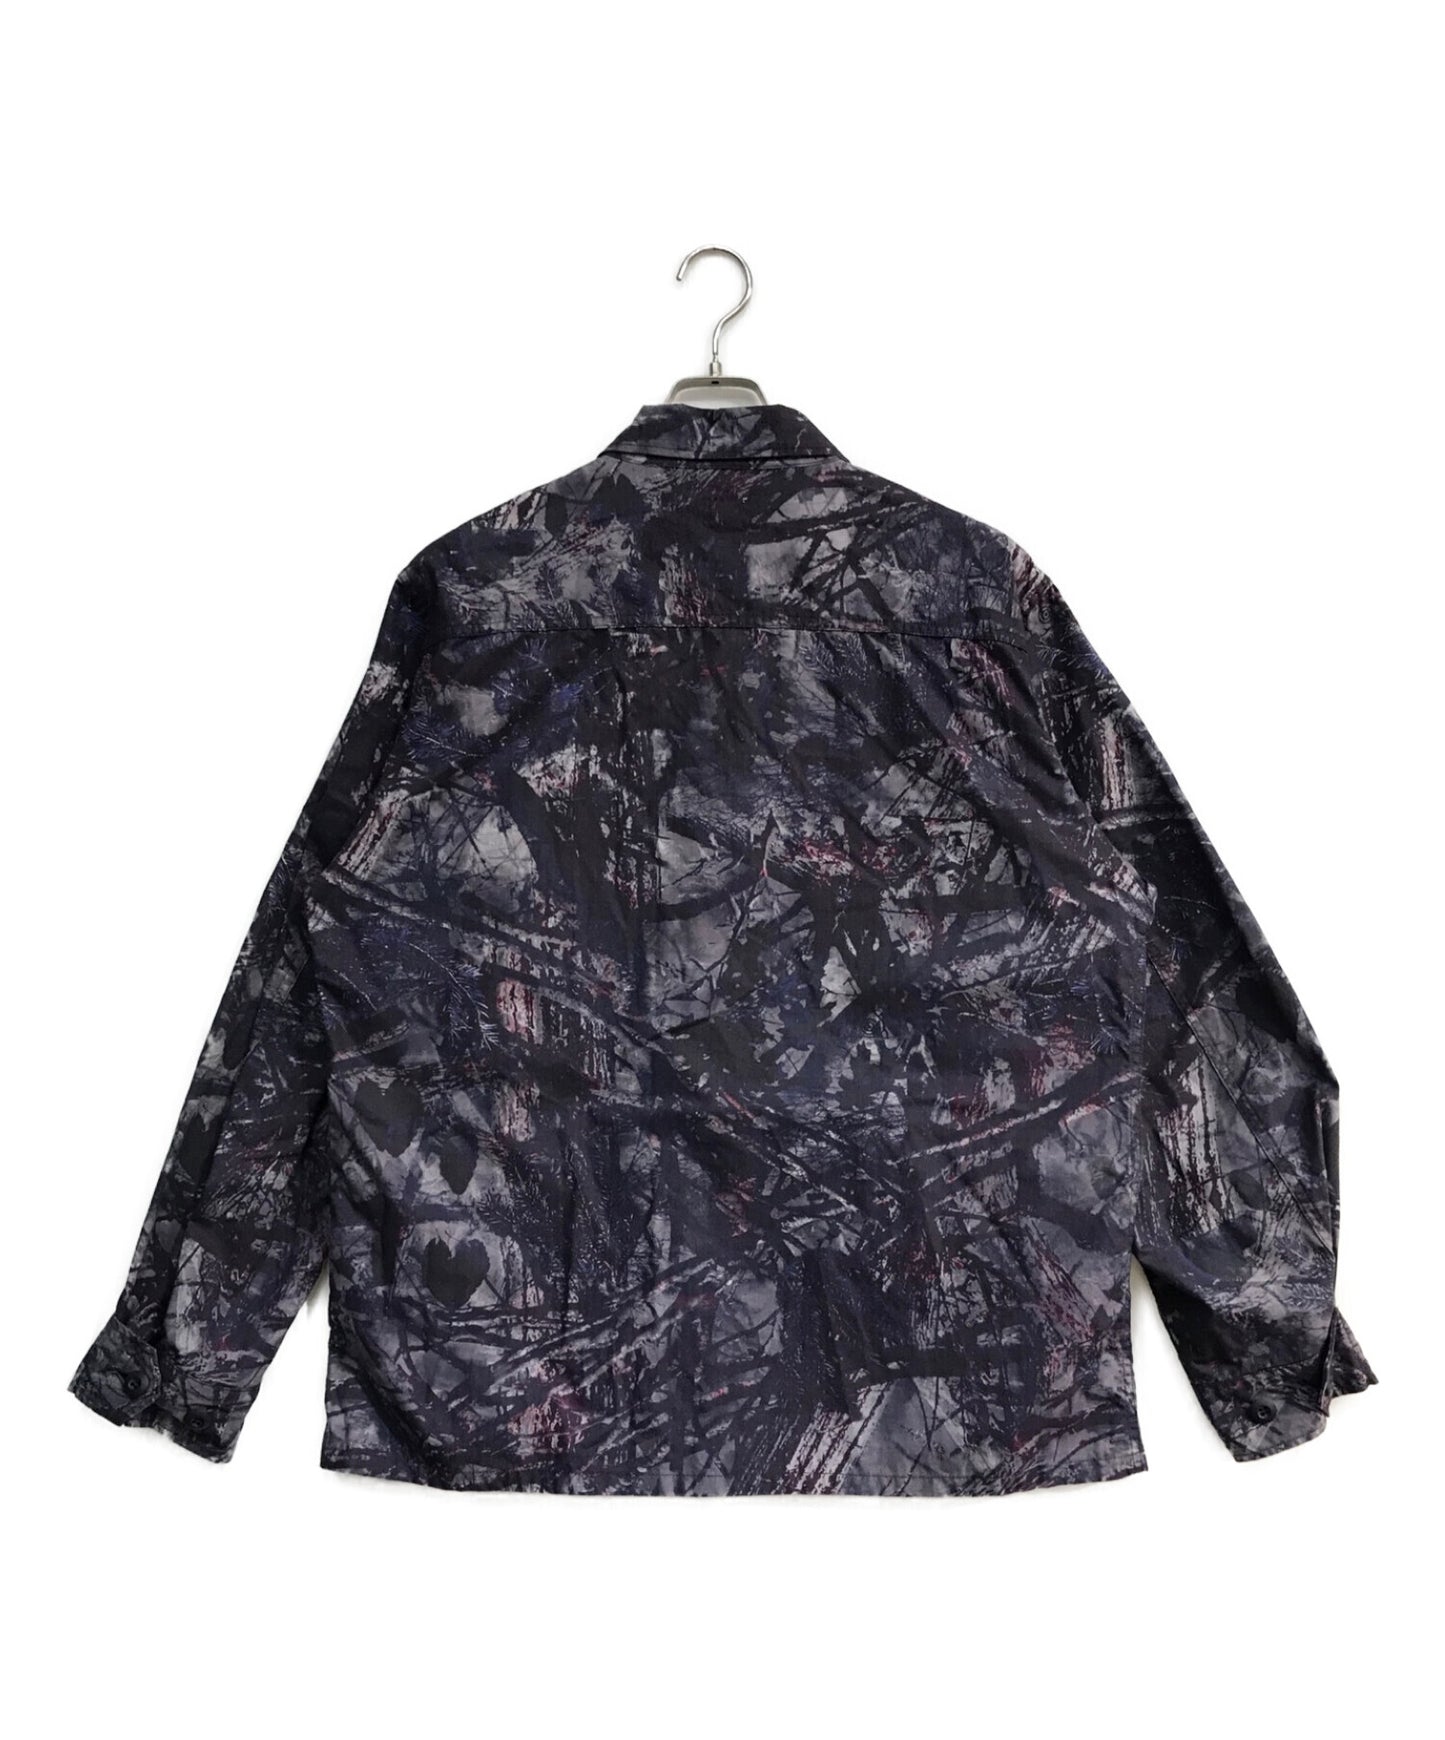 SOUTH2 WEST8 JUNGLE JAPTIGUE JACKET IN803 IN803